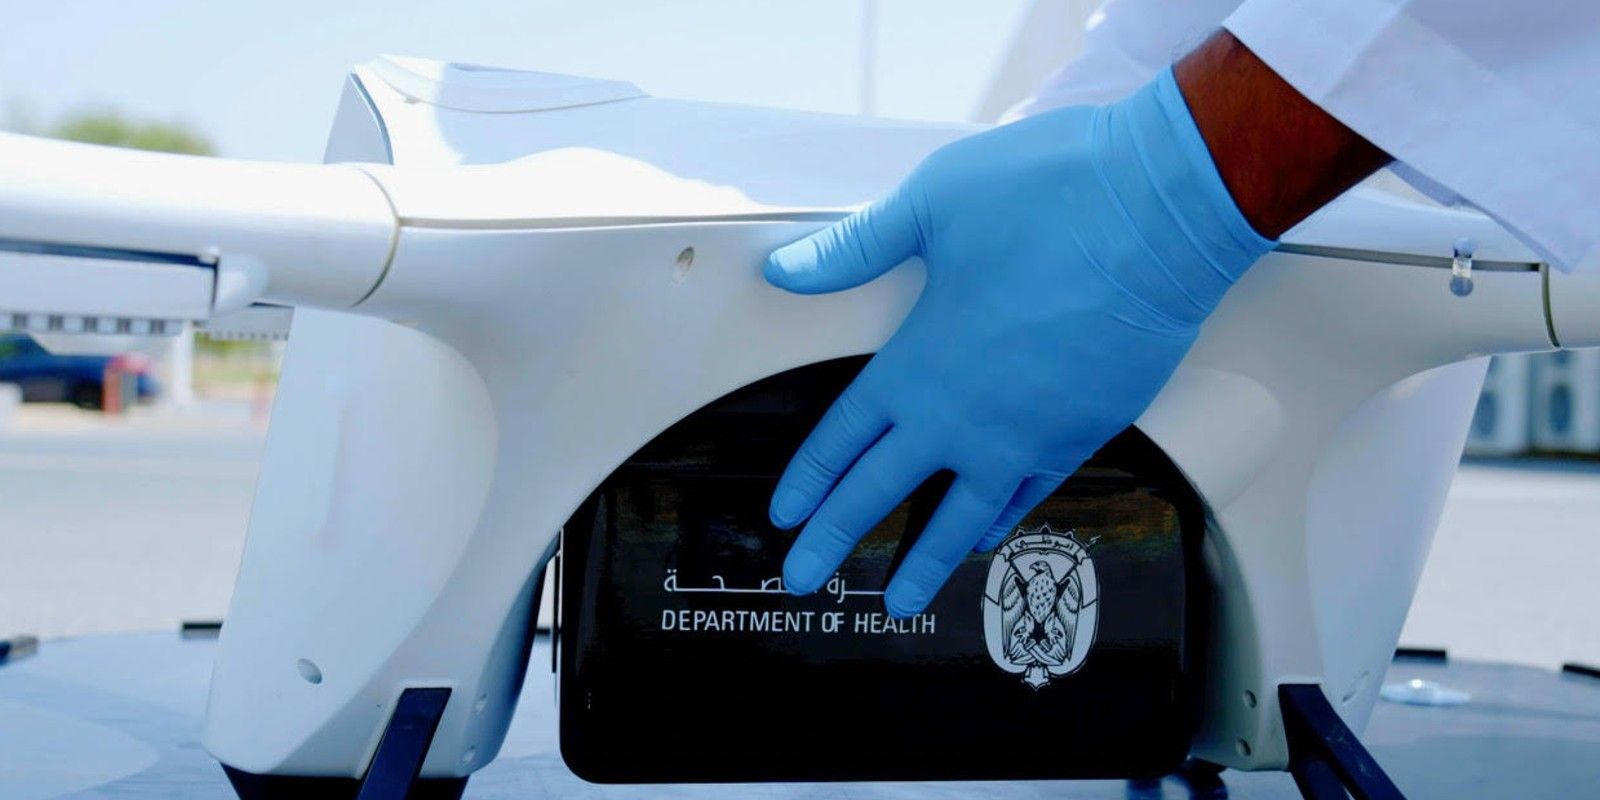 Drones Are Delivering Medical Supplies And Vital Aid – Why Not In The US?